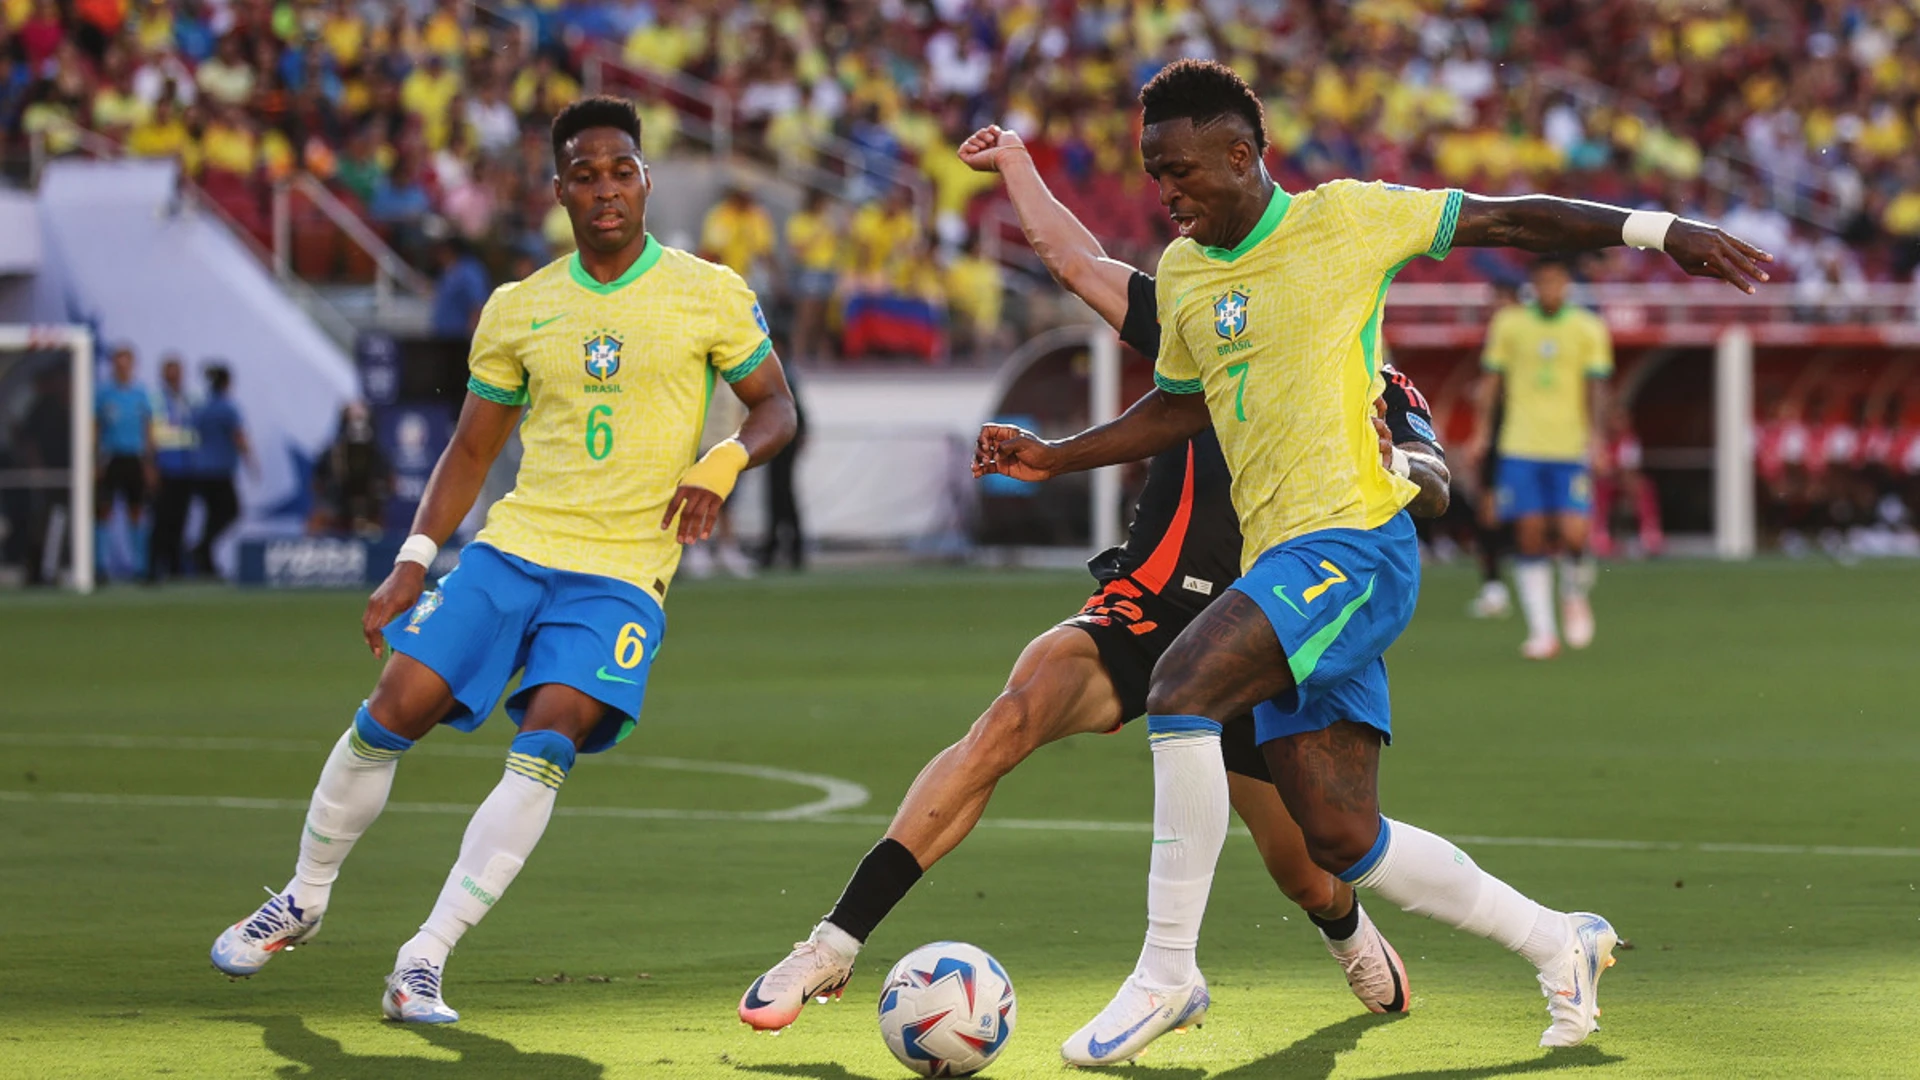 Brazil held by Colombia in Copa America, to face Uruguay quarterfinal